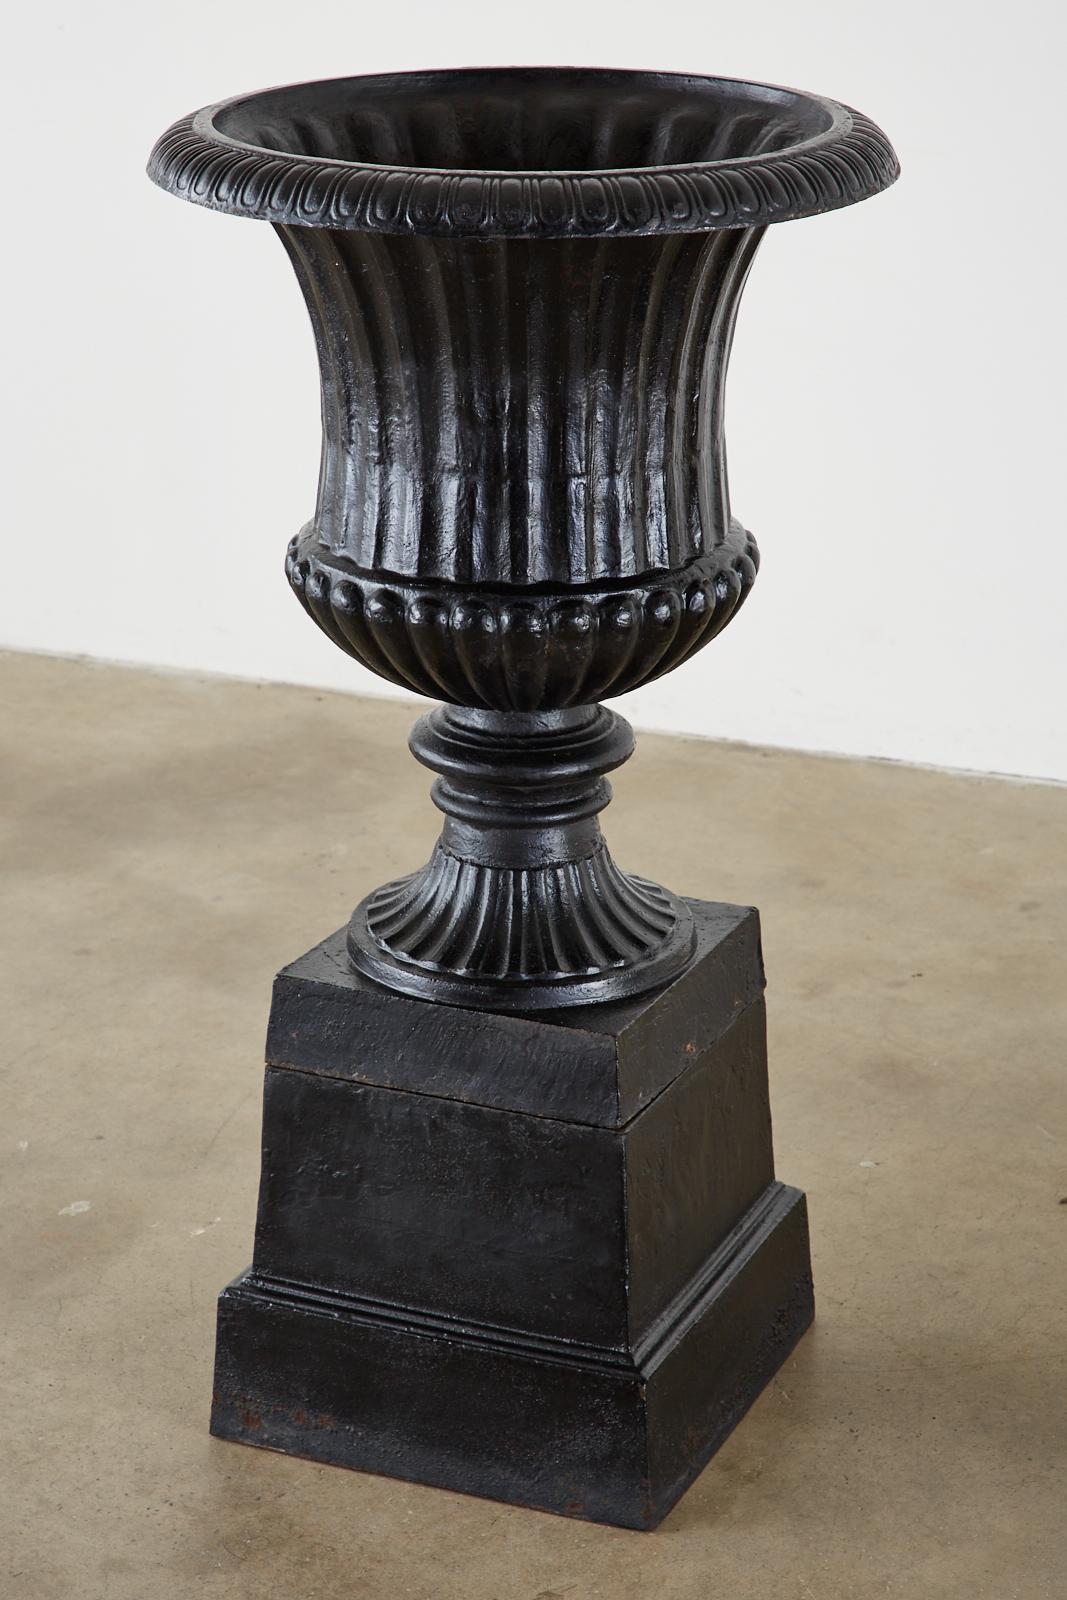 Dramatic pair of English cast iron garden urns on plinths made in the neoclassical taste. Large campana form urns with fluted bodies set on stepped bases. The urns have drain holes in the bottoms and a painted finish with an aged patina. From an